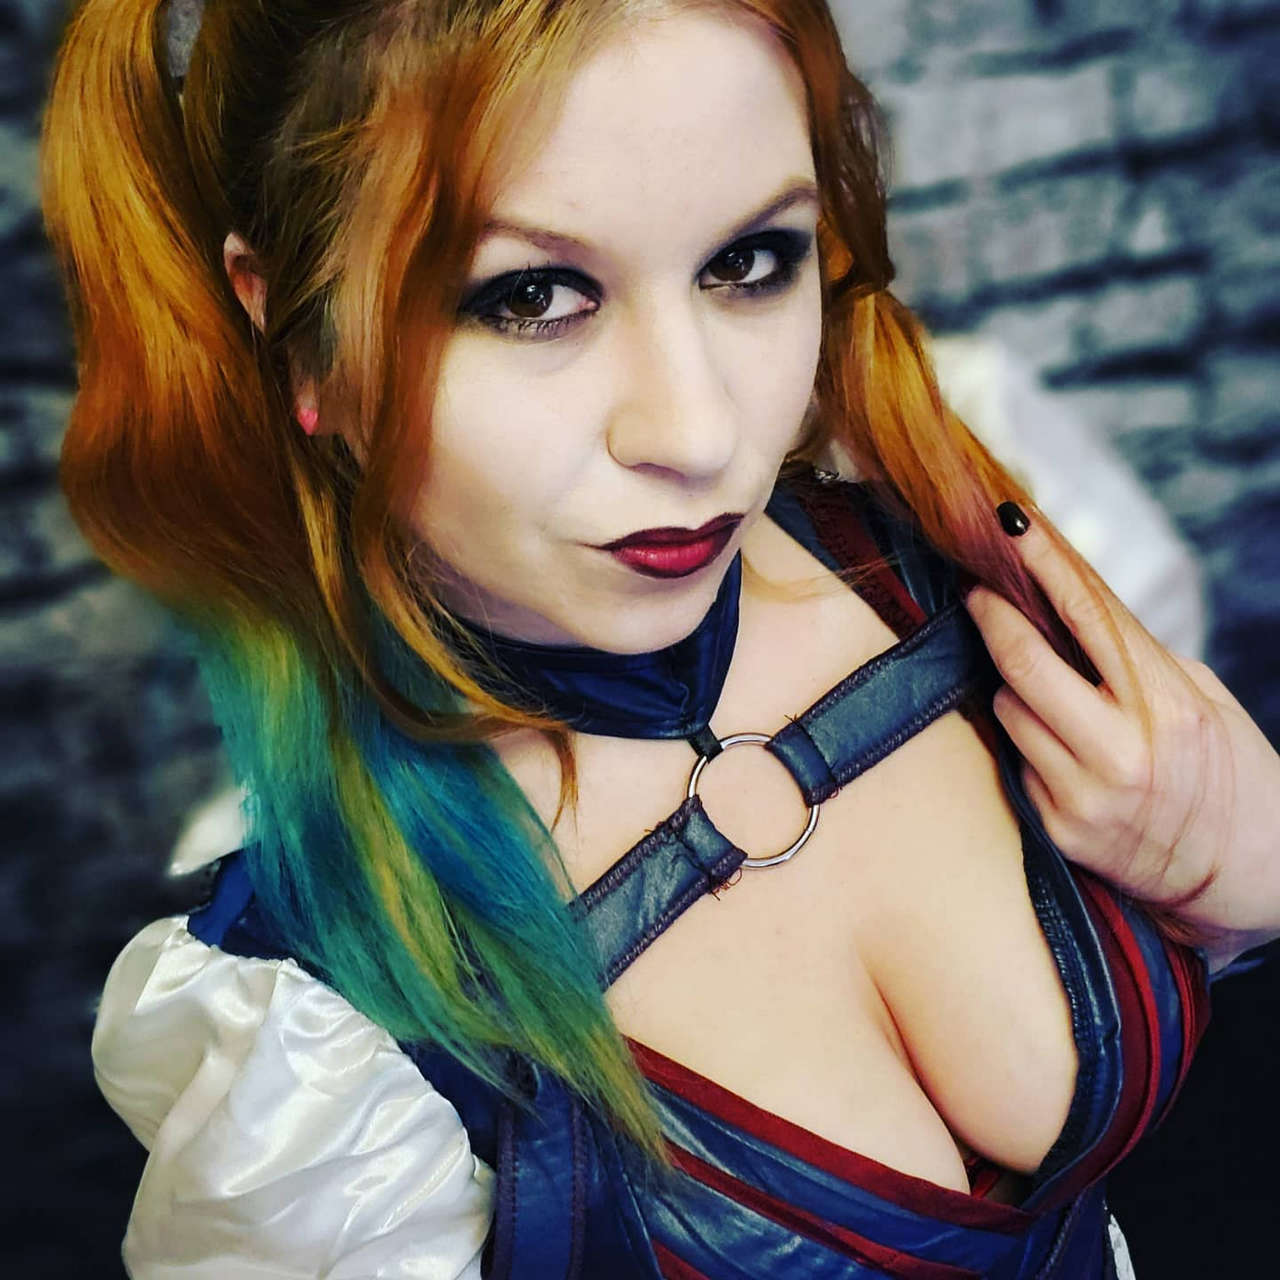 Harley Quinn Arkham Knight Cosplayer Fayedreamr Self Instagram And Patreon